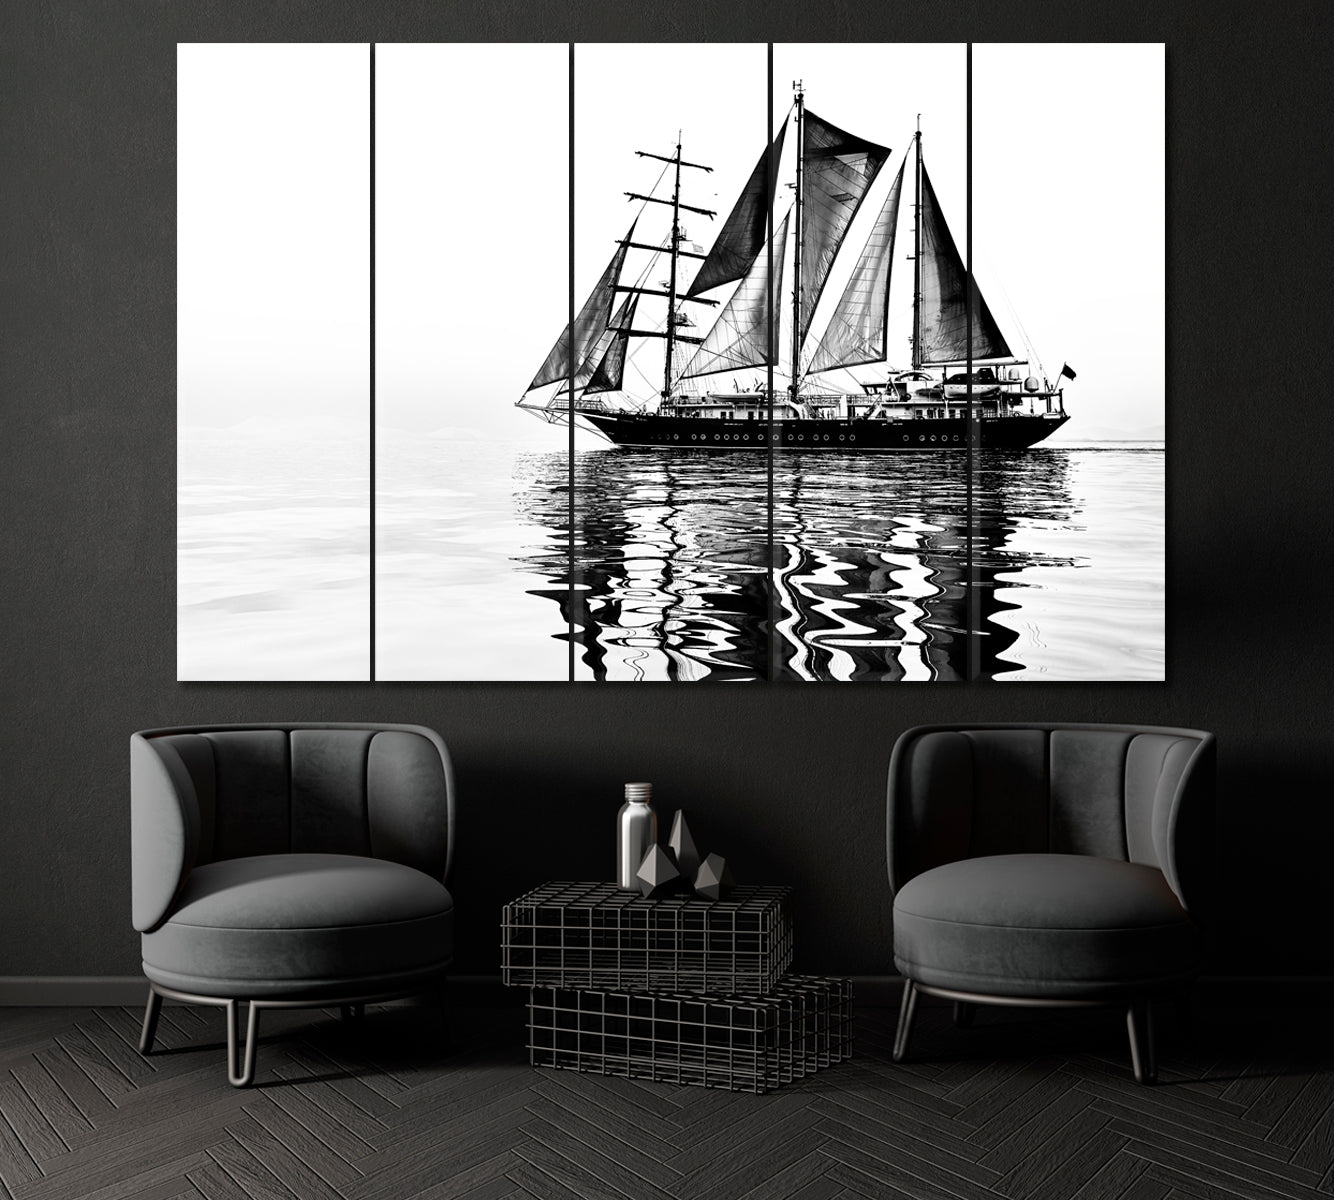 Sailboat in Black and White Canvas Print ArtLexy 5 Panels 36"x24" inches 